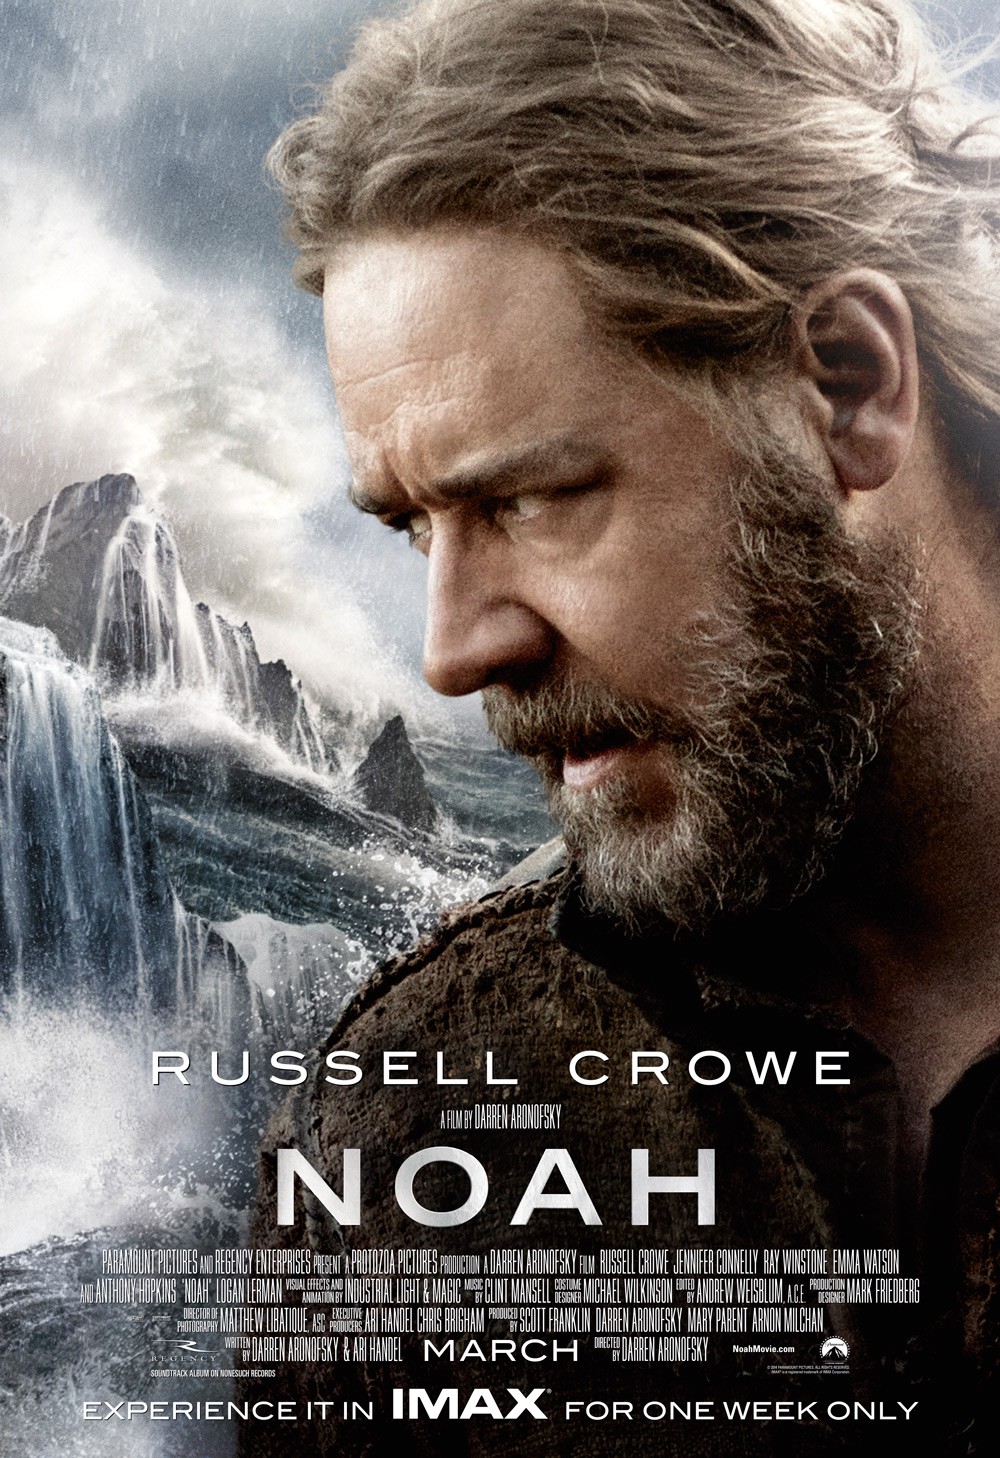 Jennifer-Connelly-in-Noah-2014-Movie-Poster